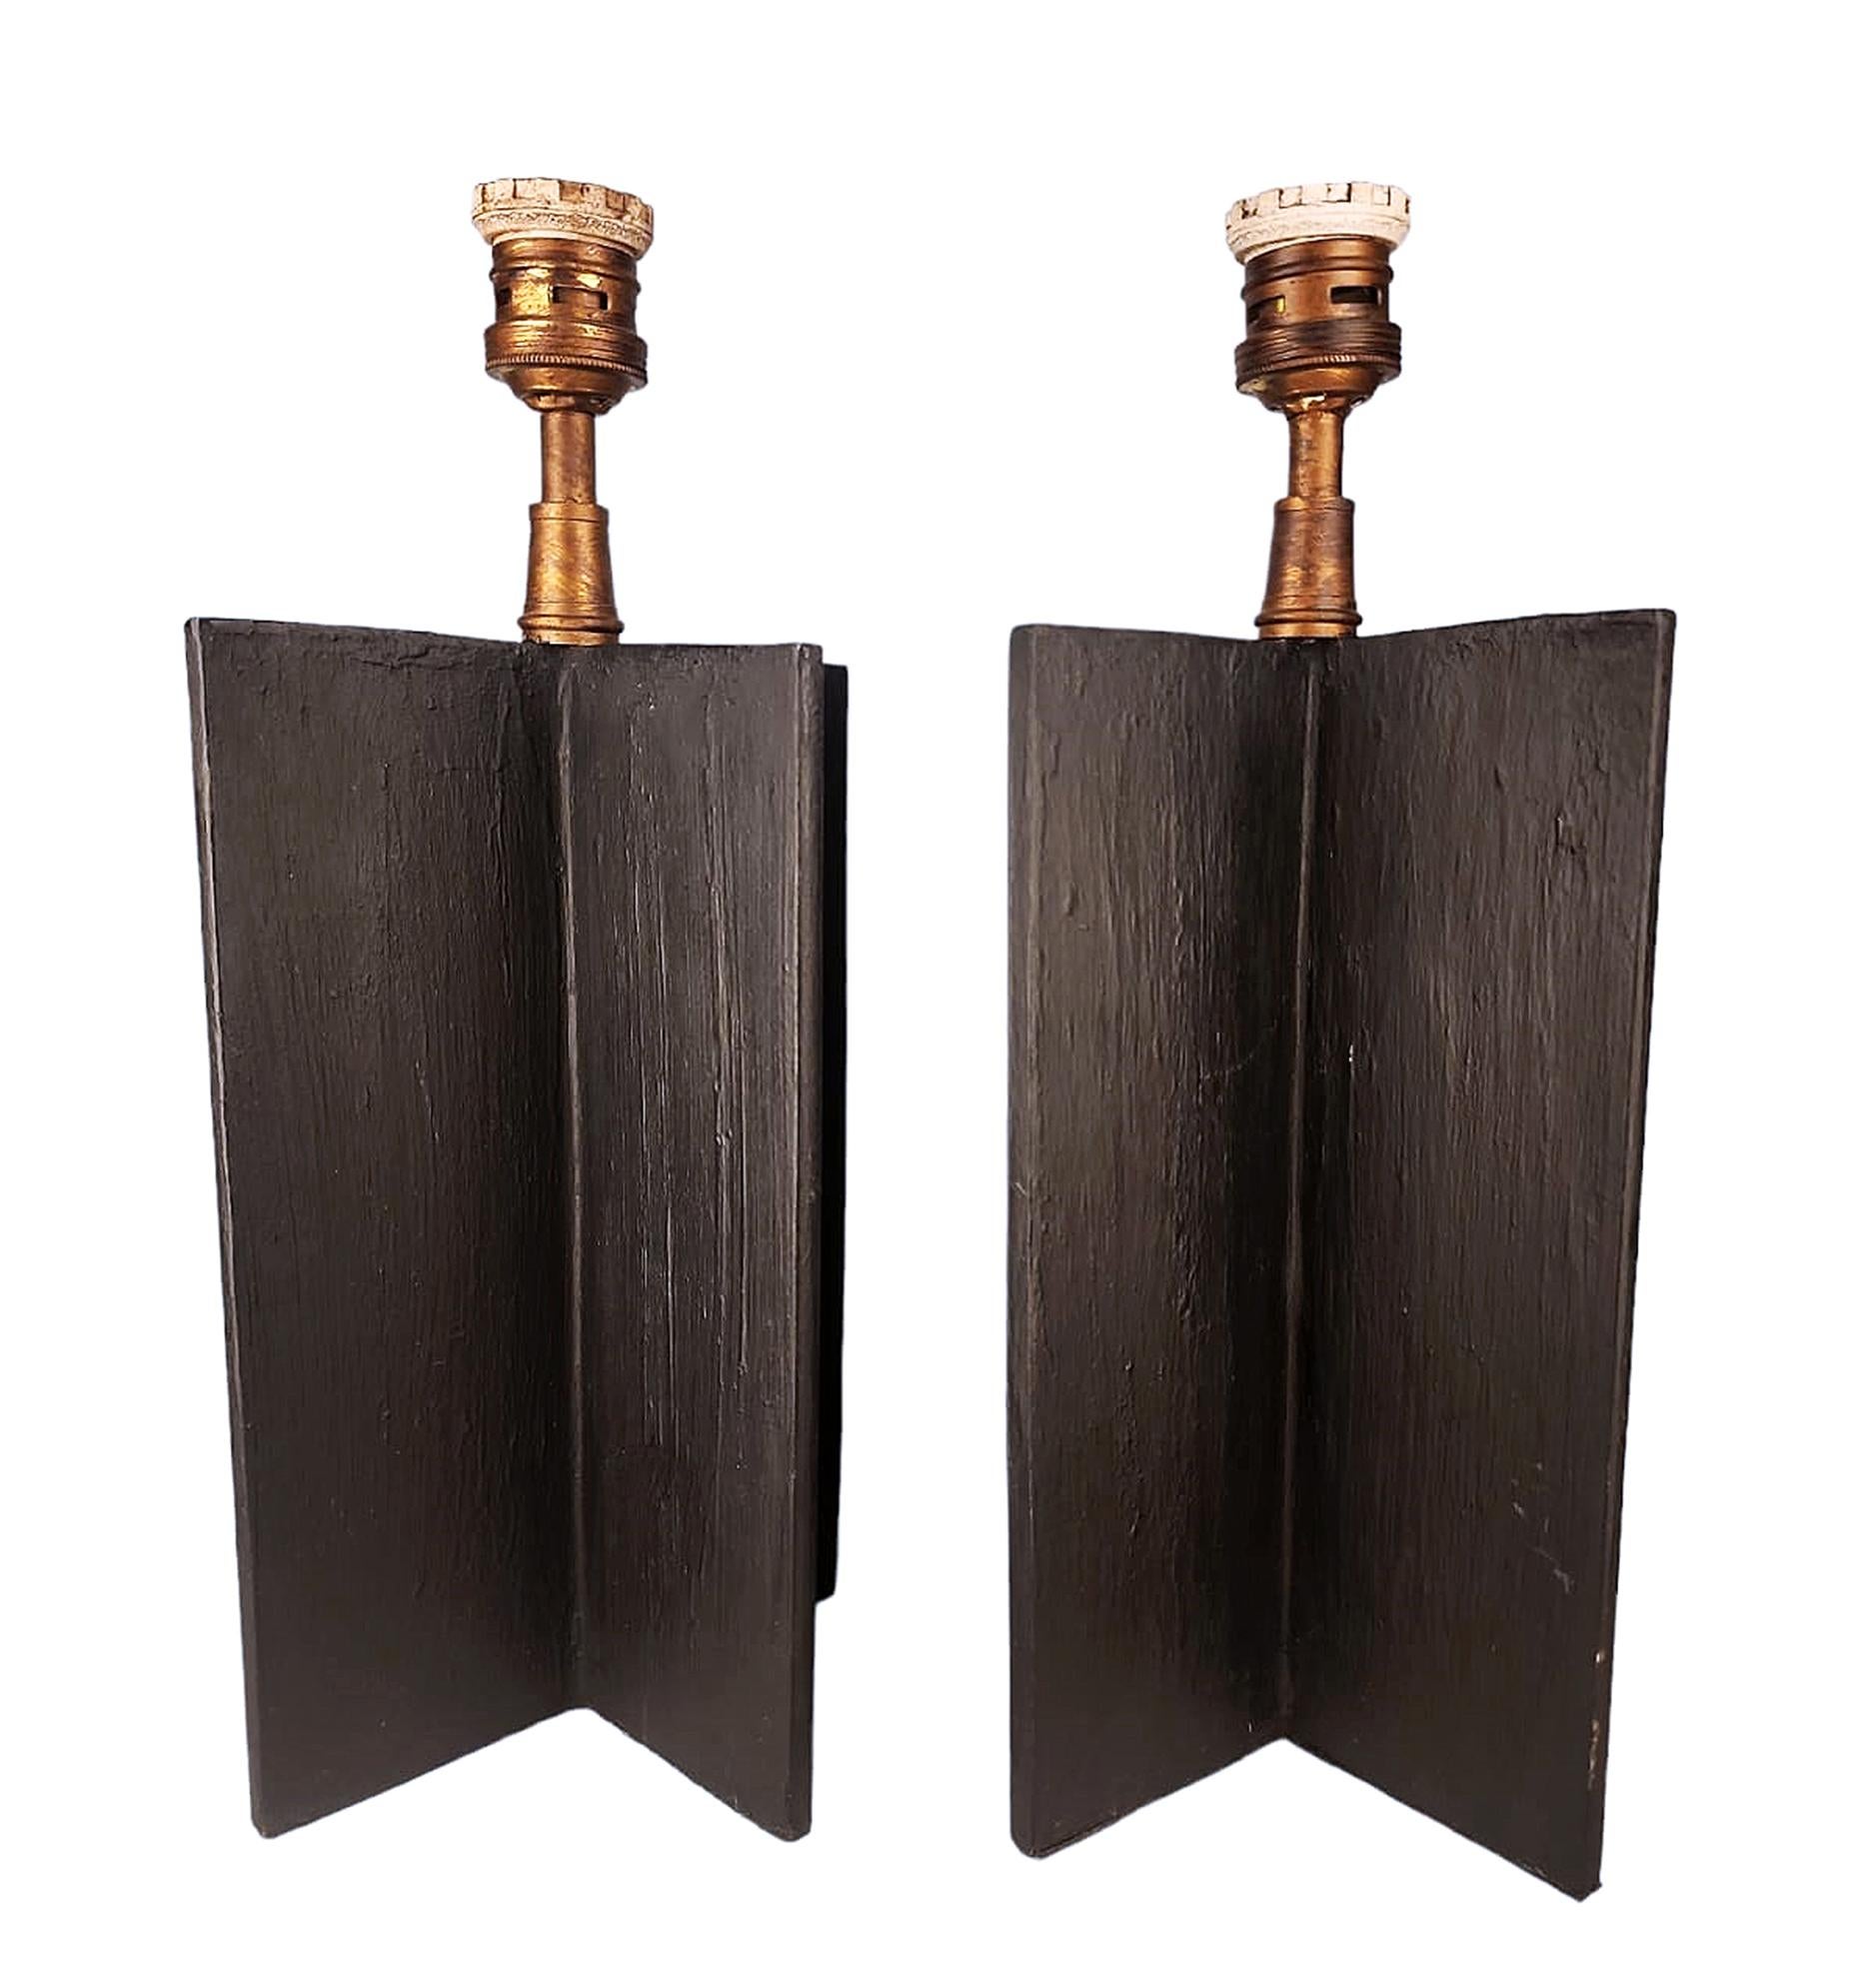 Pair of Jean-Michel Frank's iron 'Croisillon' design table lamps for argentine Company Comte

By: Jean-Michel Frank, Comte S.A.
Material: iron, metal, cord
Technique: cast, molded, pressed, metalwork, forged, hand-crafted
Dimensions: 5.5 in x 5.5 in